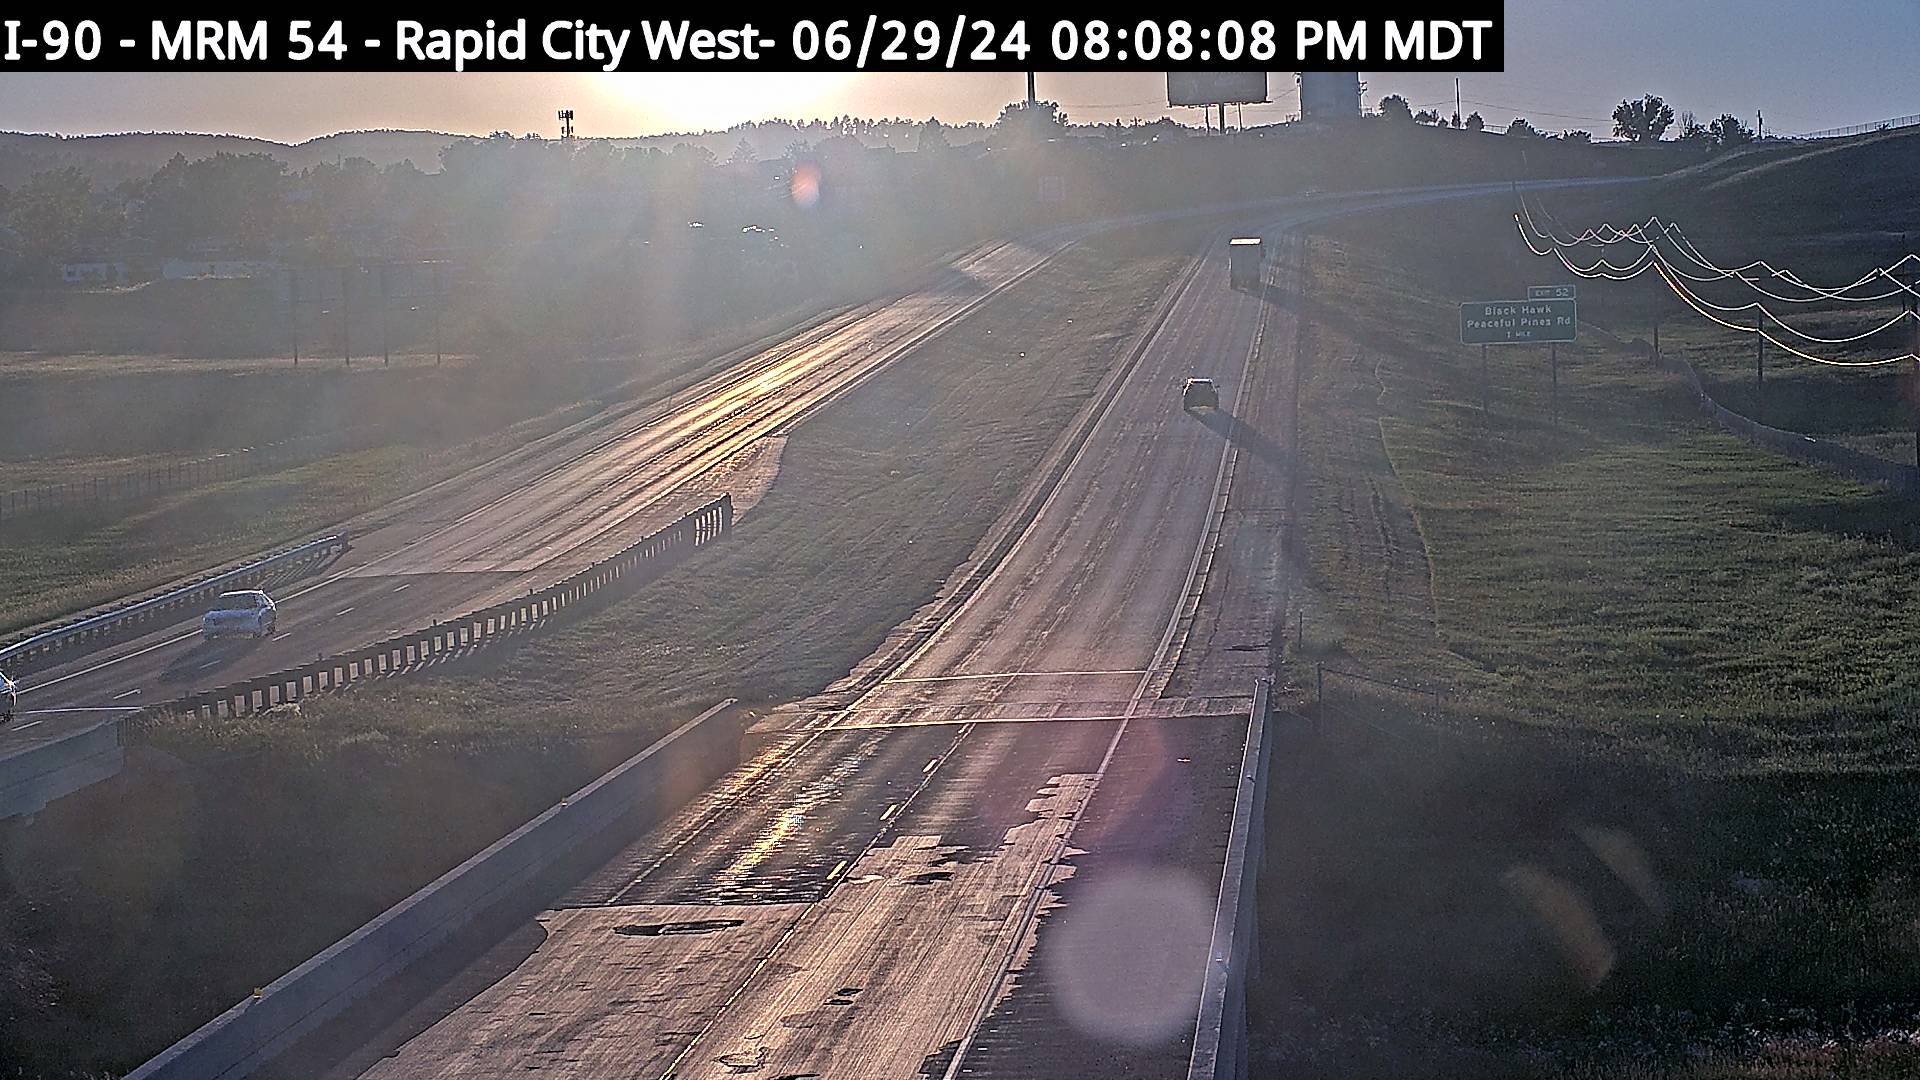 West of town along I-90 @ MP 54 - North (WB) Traffic Camera